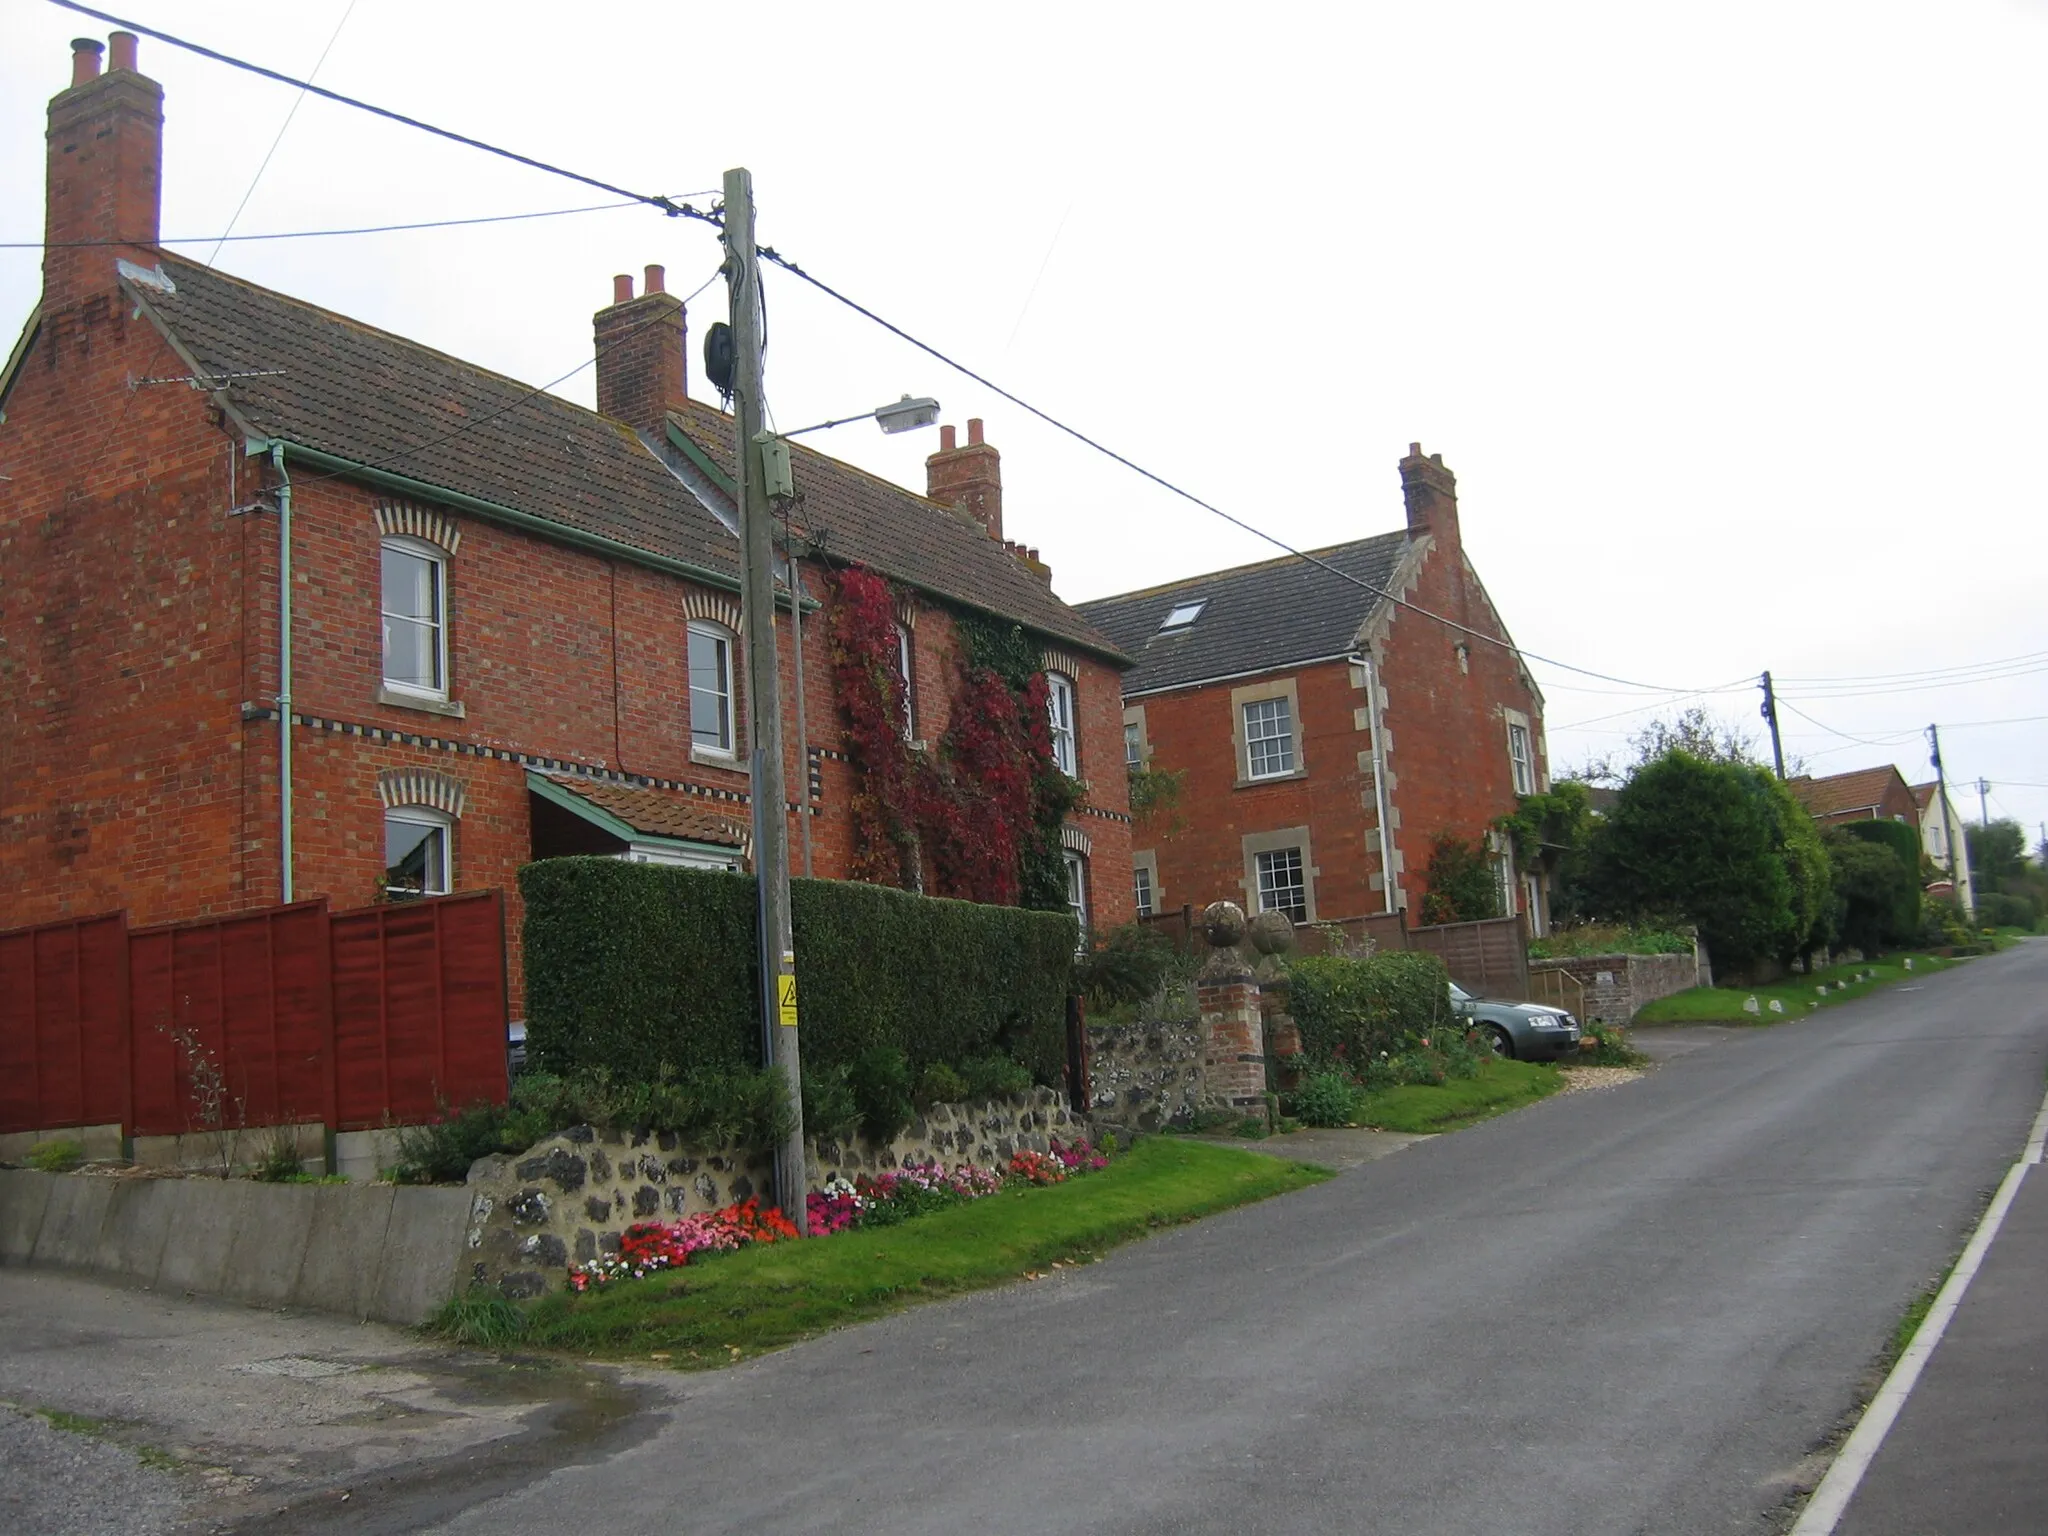 Photo showing: Main road of Seend Cleeve, with the village's only red telephone box visible in the background.